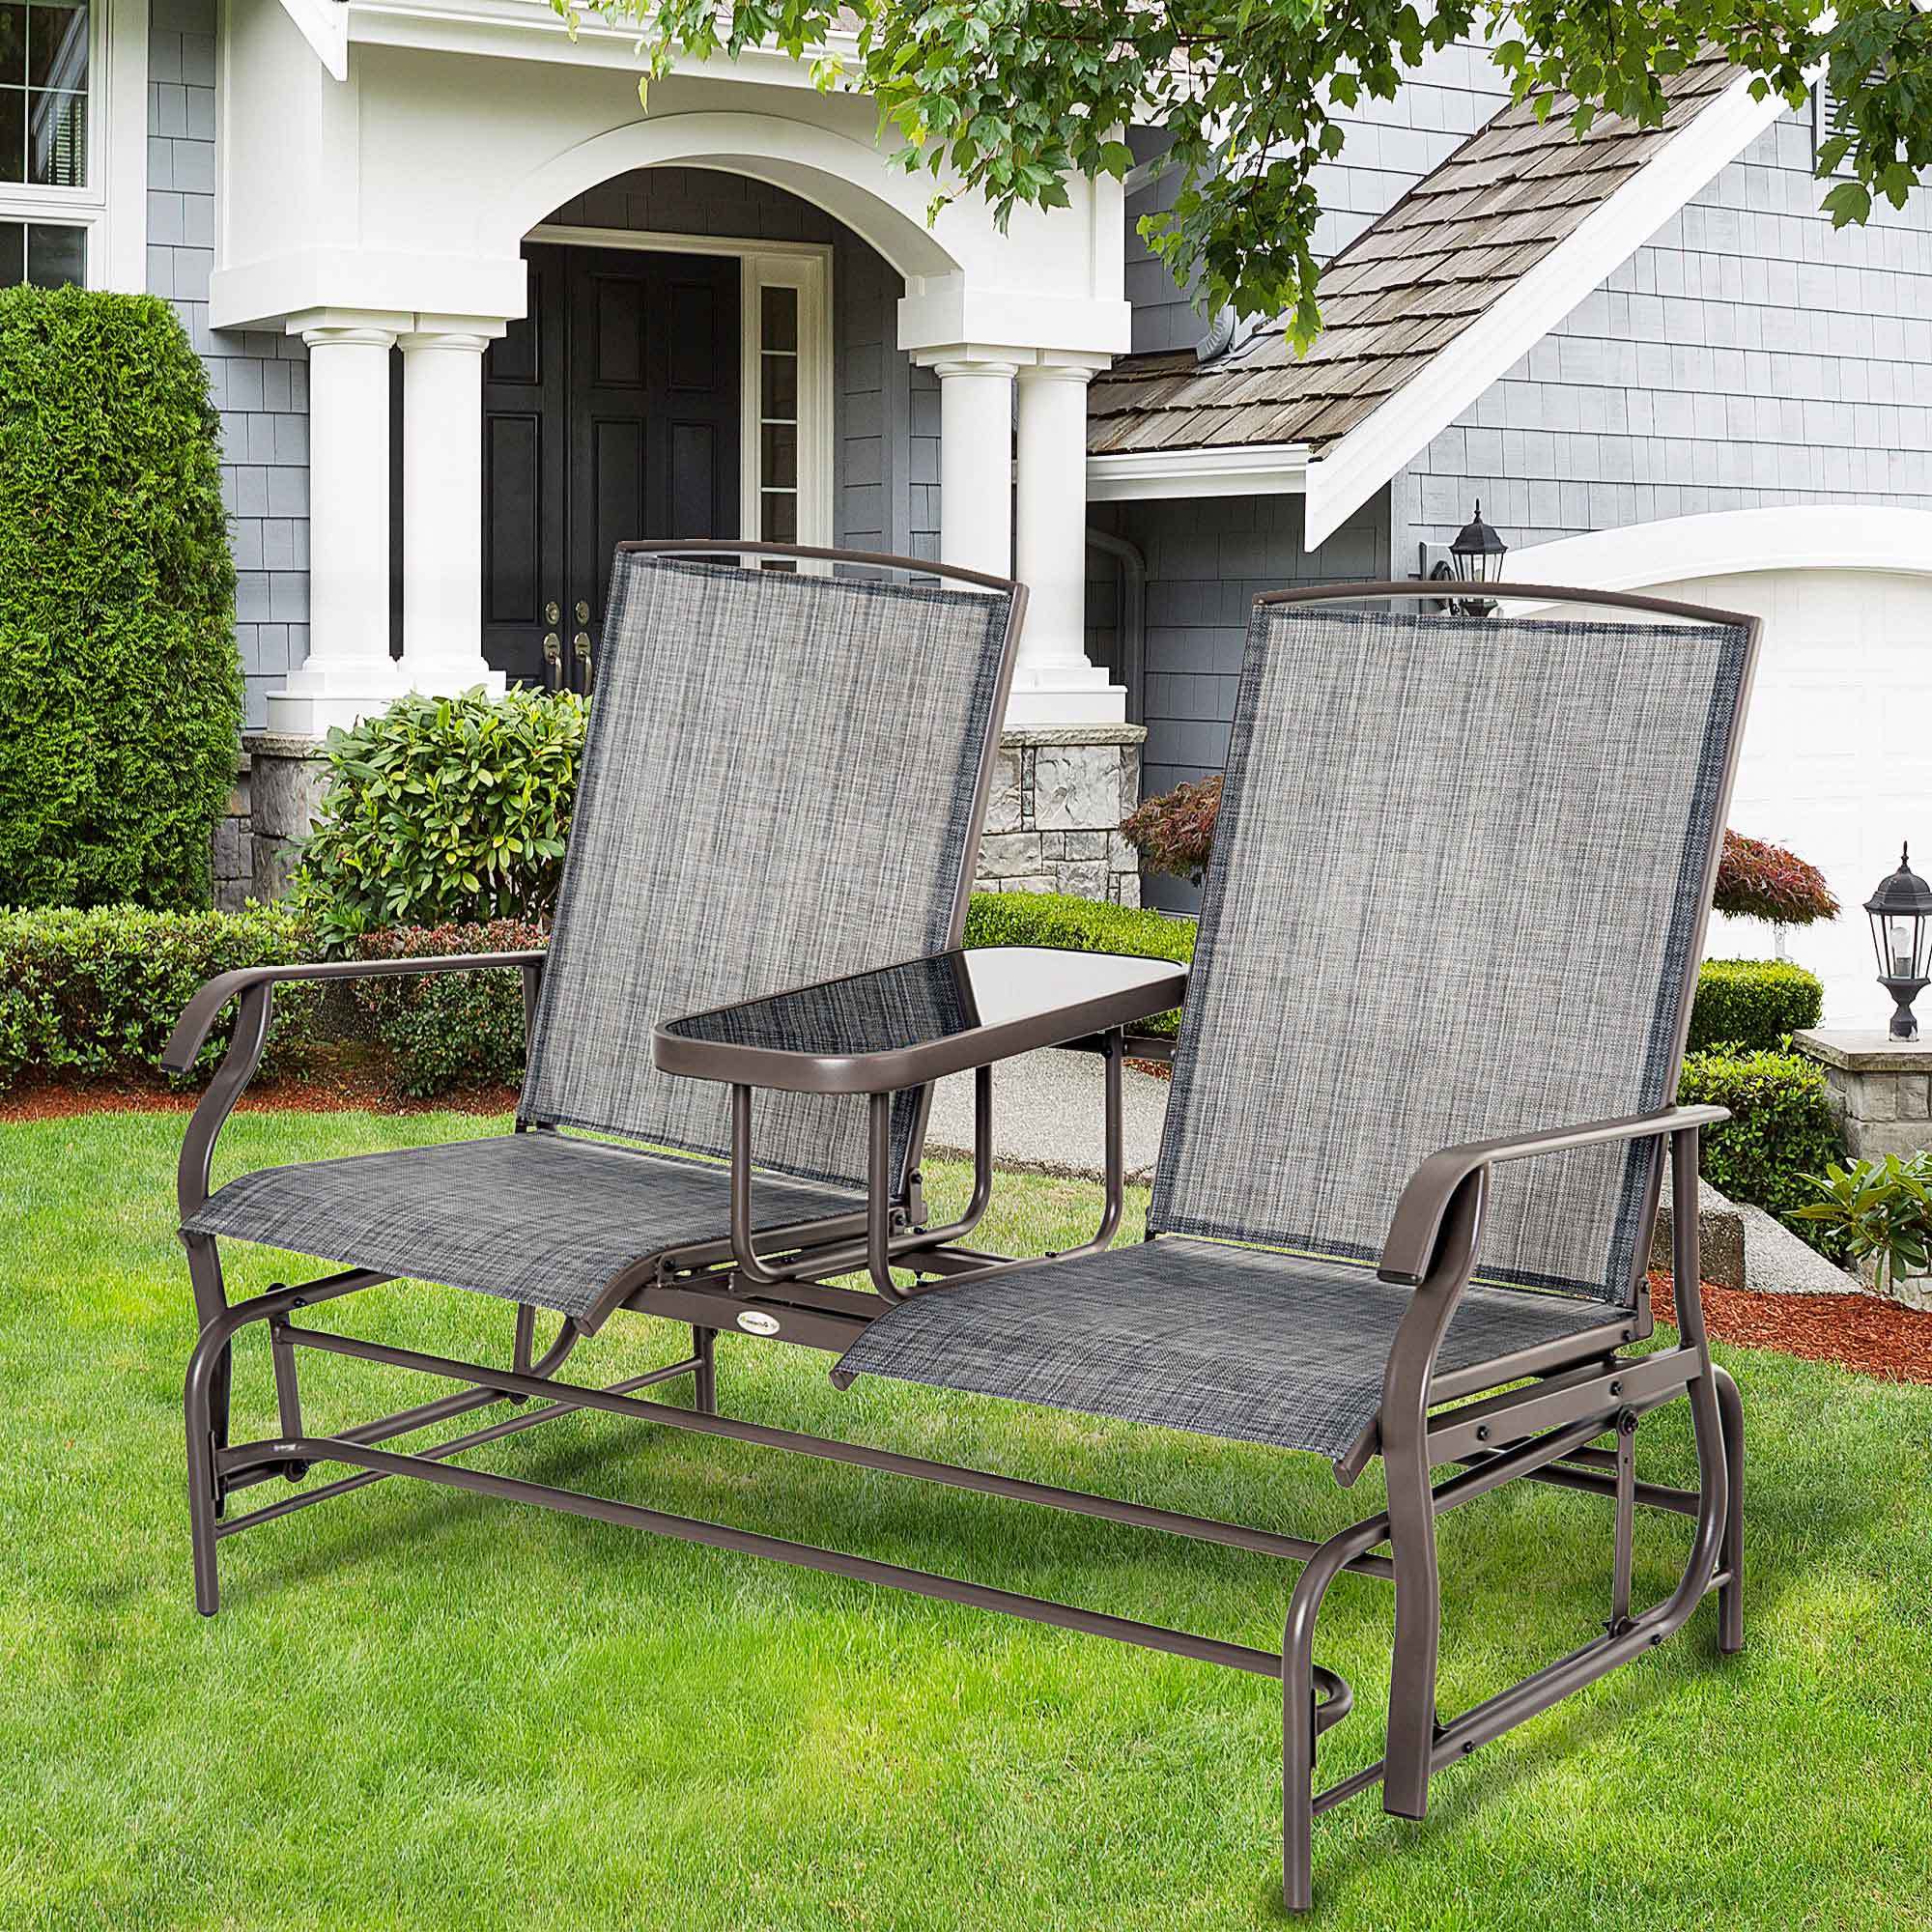 Outsunny Outdoor Glider Bench with Center Table,